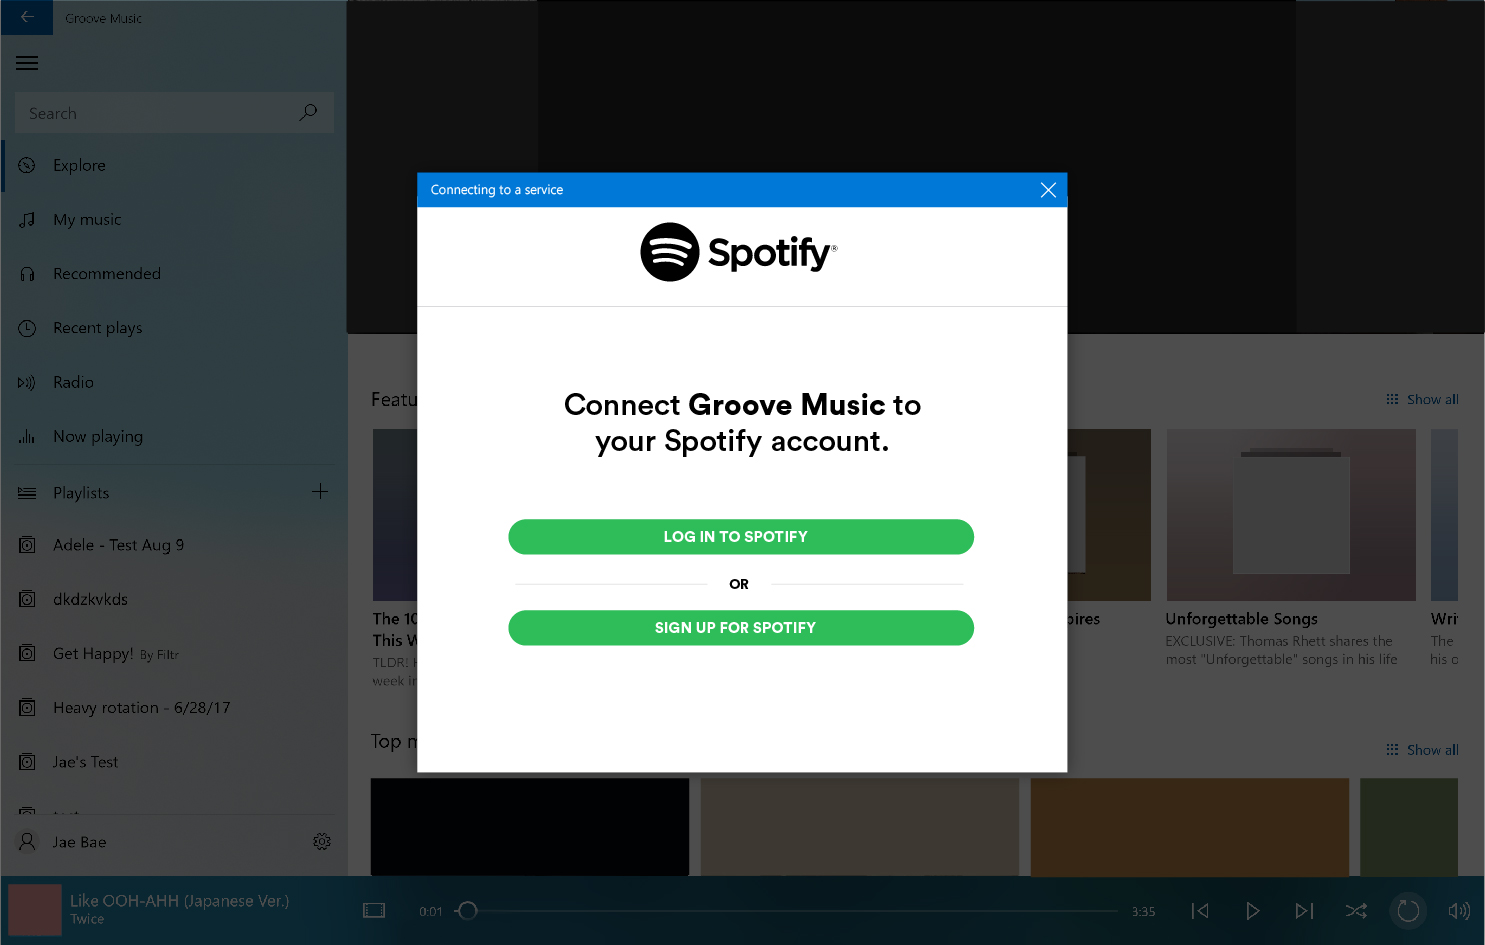 Cortana Suddenly Tries to Access Groove Music Instead of Spotify ed7df2e904377ff622107aa73827bb98.jpg